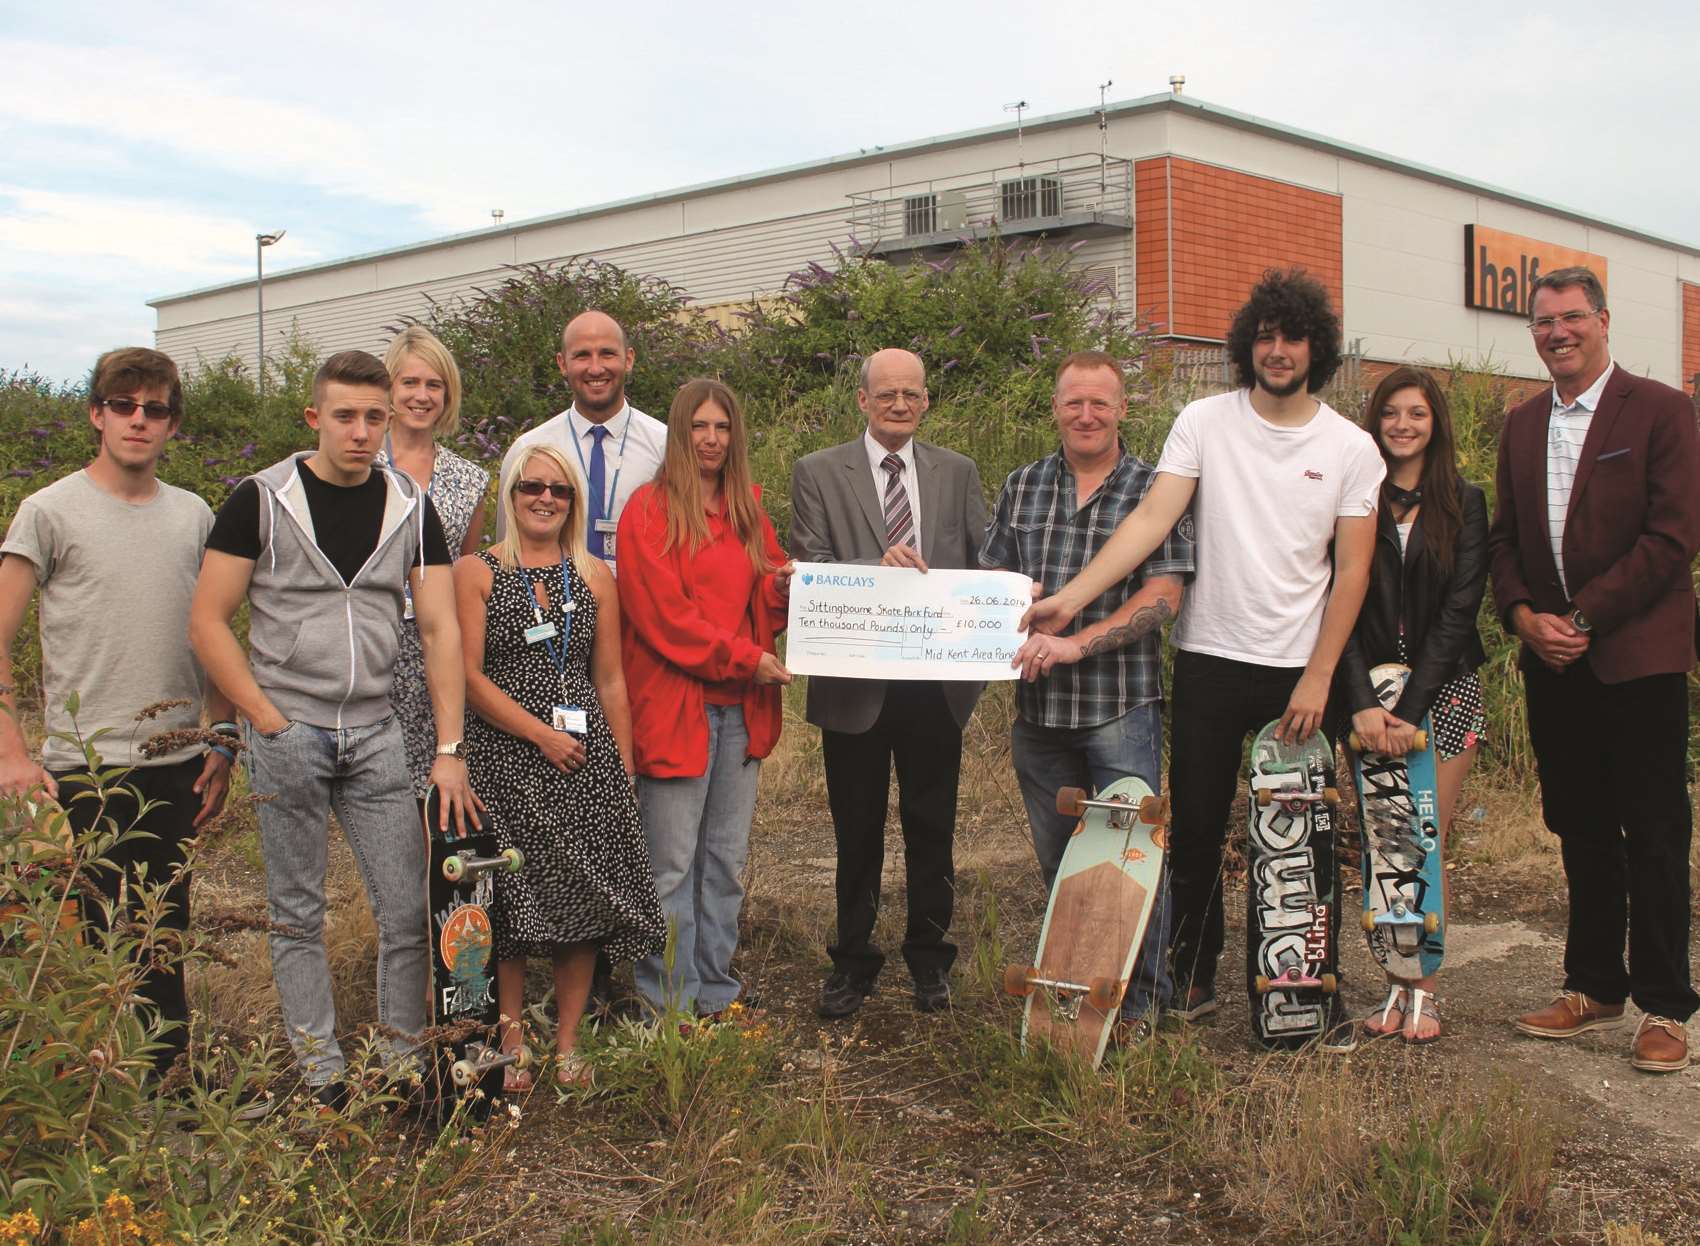 The skate park will be built where these campaigners are standing, behind Halfords at Sittingbourne Retail Park